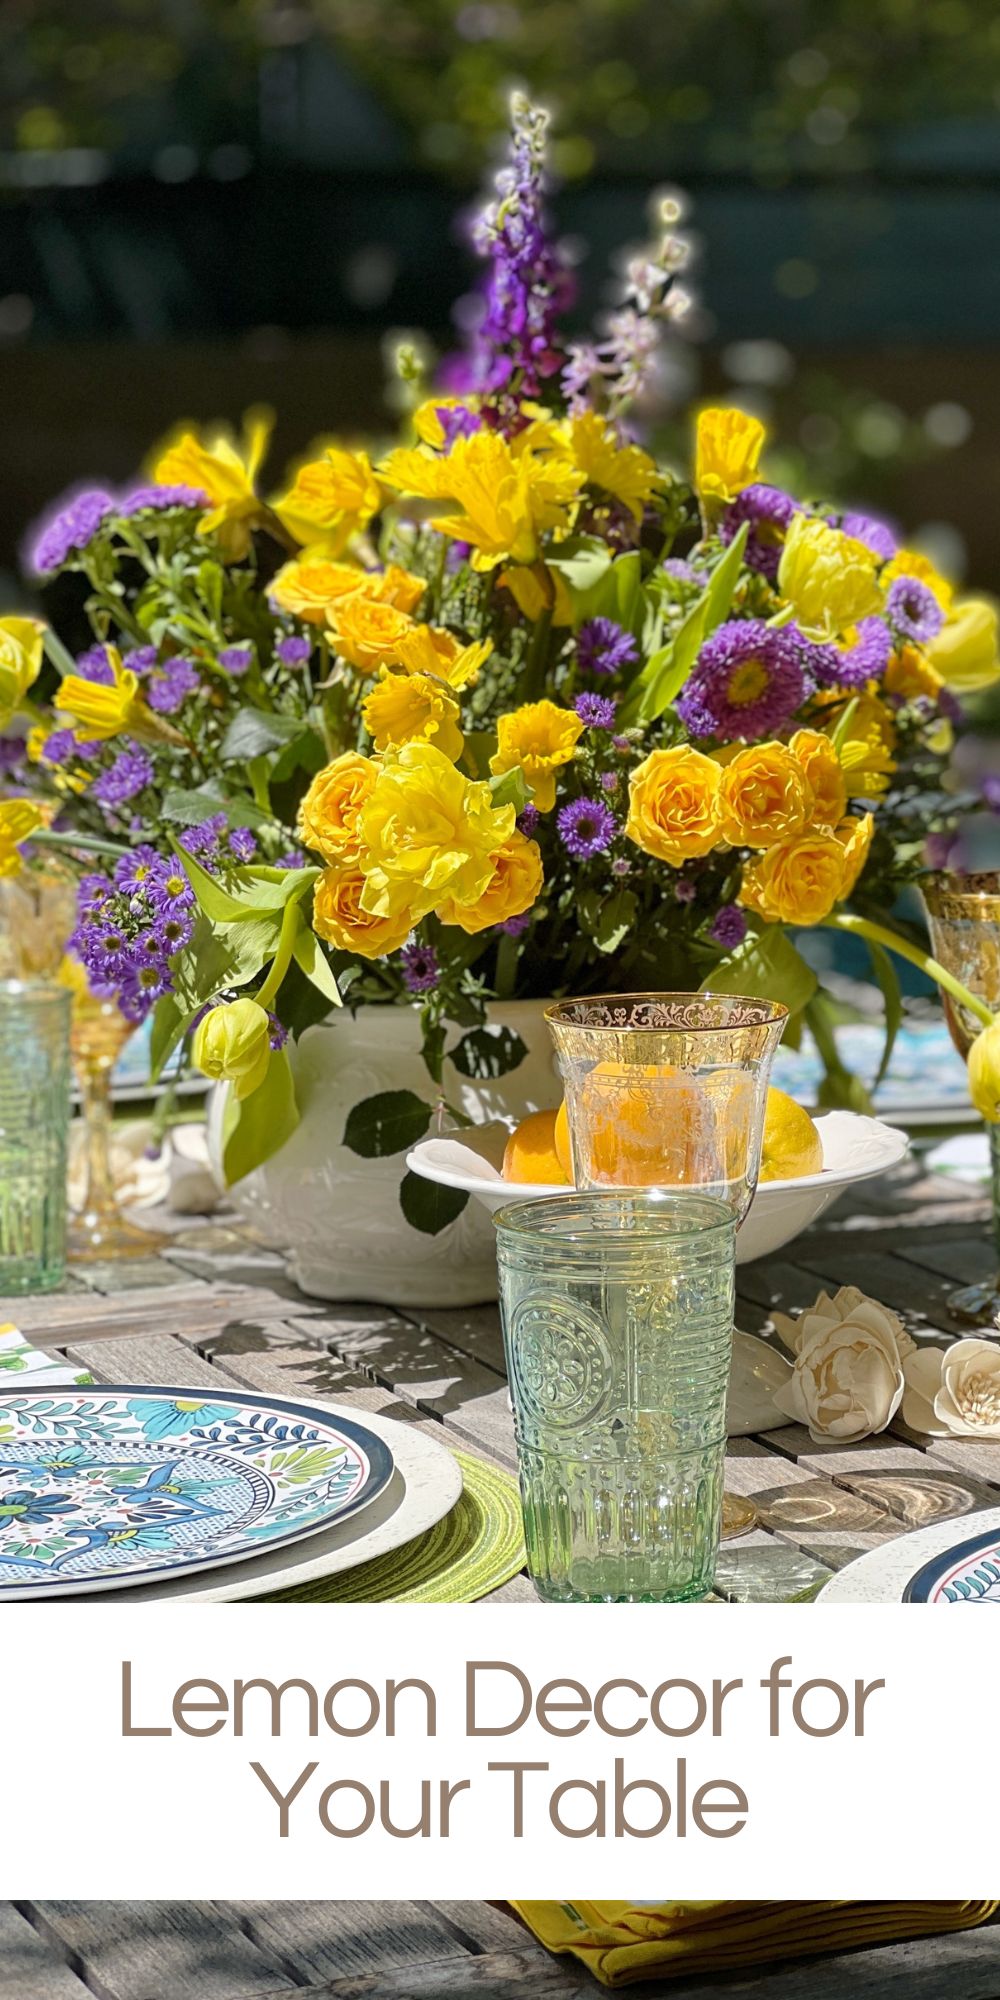 Today I am sharing some really fun lemon decor ideas for your table. I love the look of lemon and this table is so perfect for spring dining.